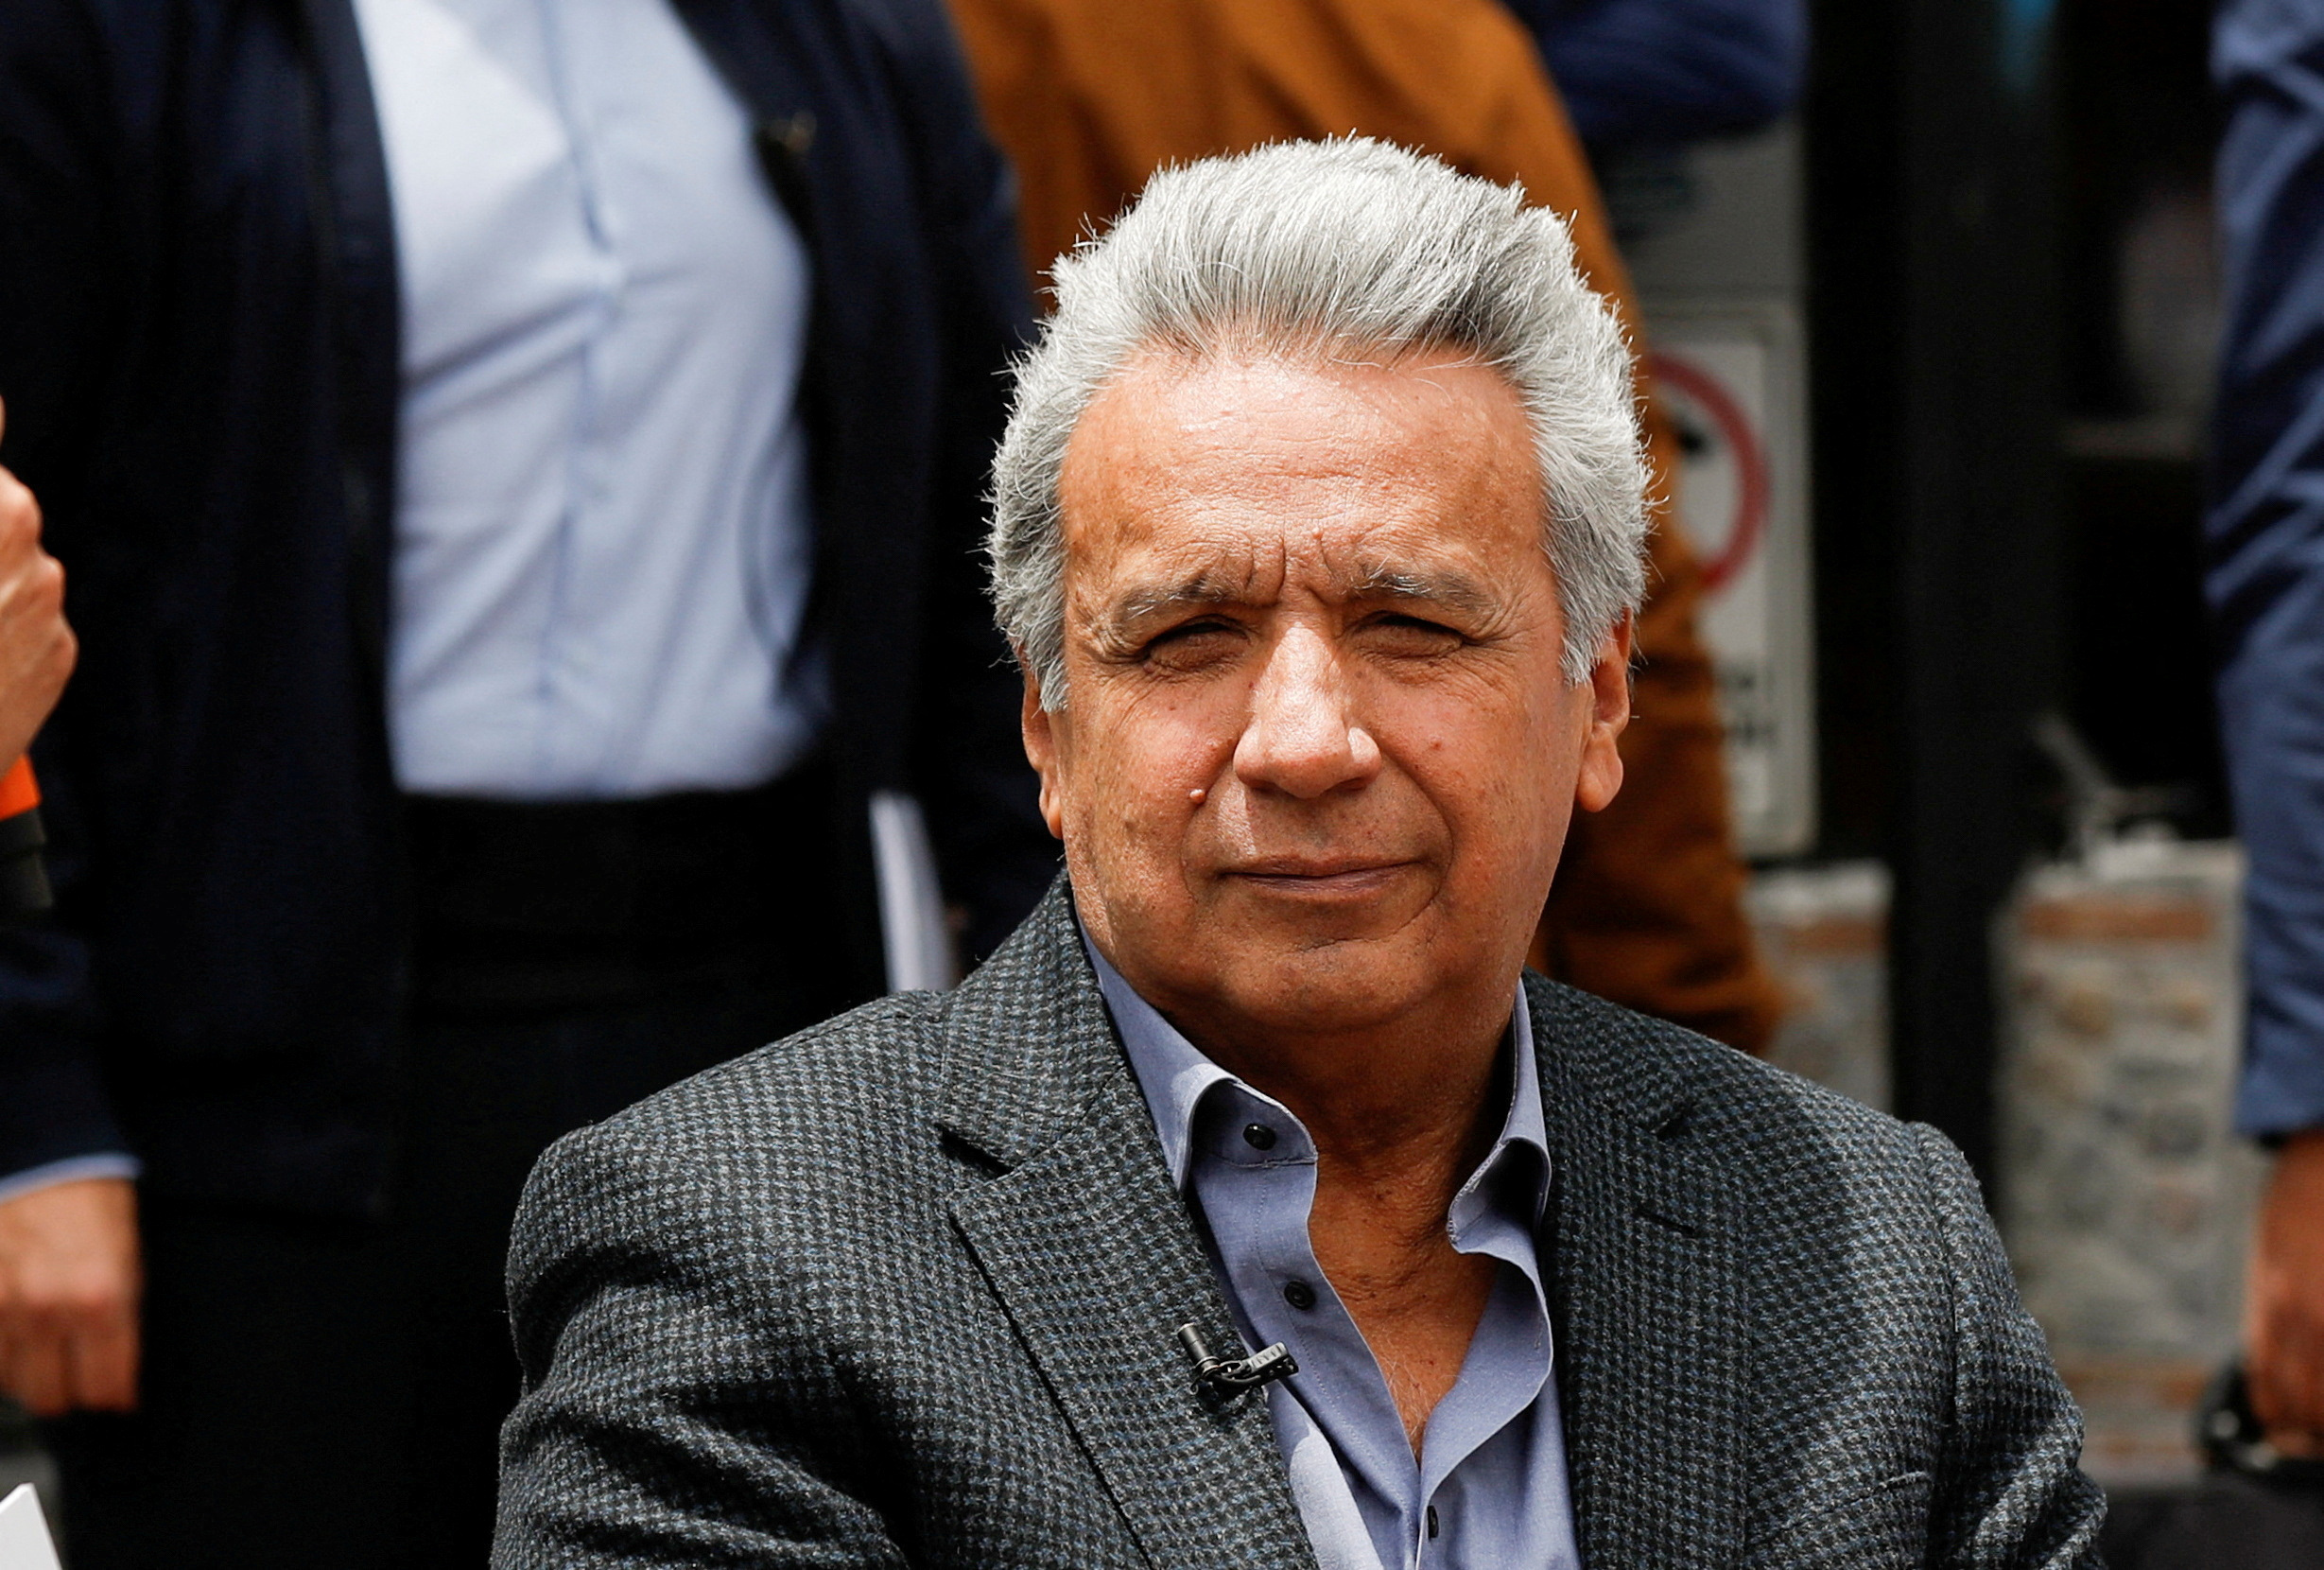 Ecuadorian President Lenin Moreno visits areas affected by protests, in Quito